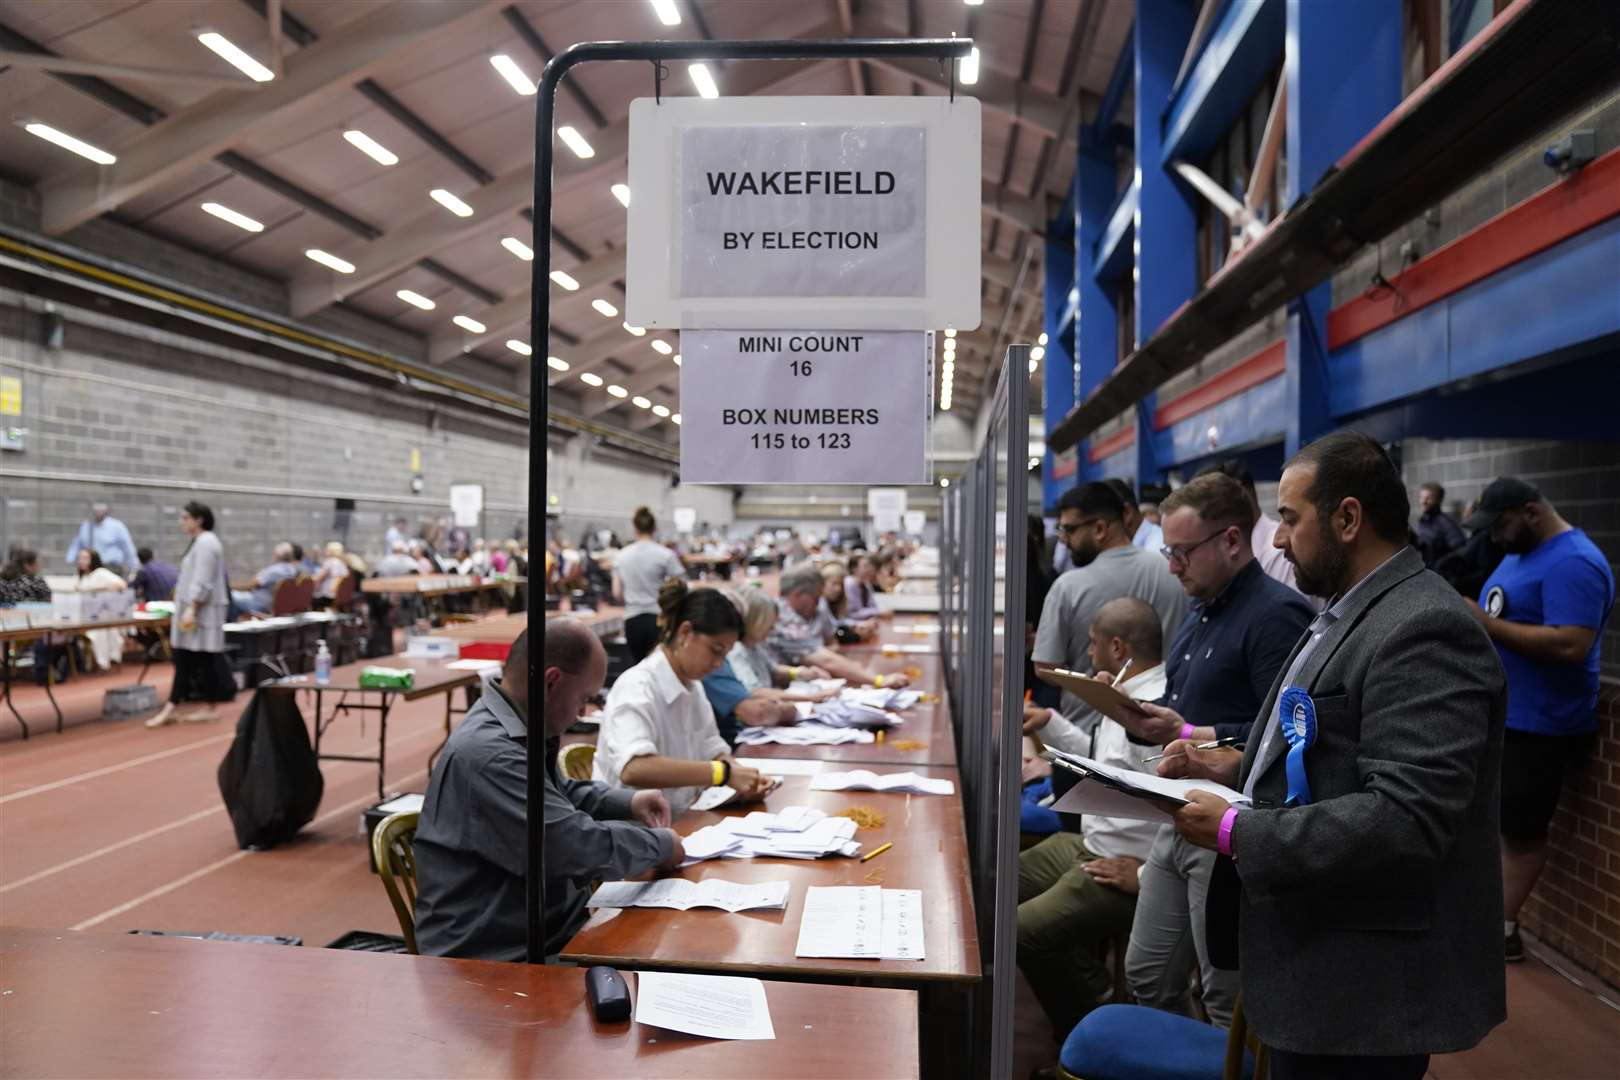 Party officials observe the count at Thornes Park Stadium in Wakefield (Danny Lawson/PA)